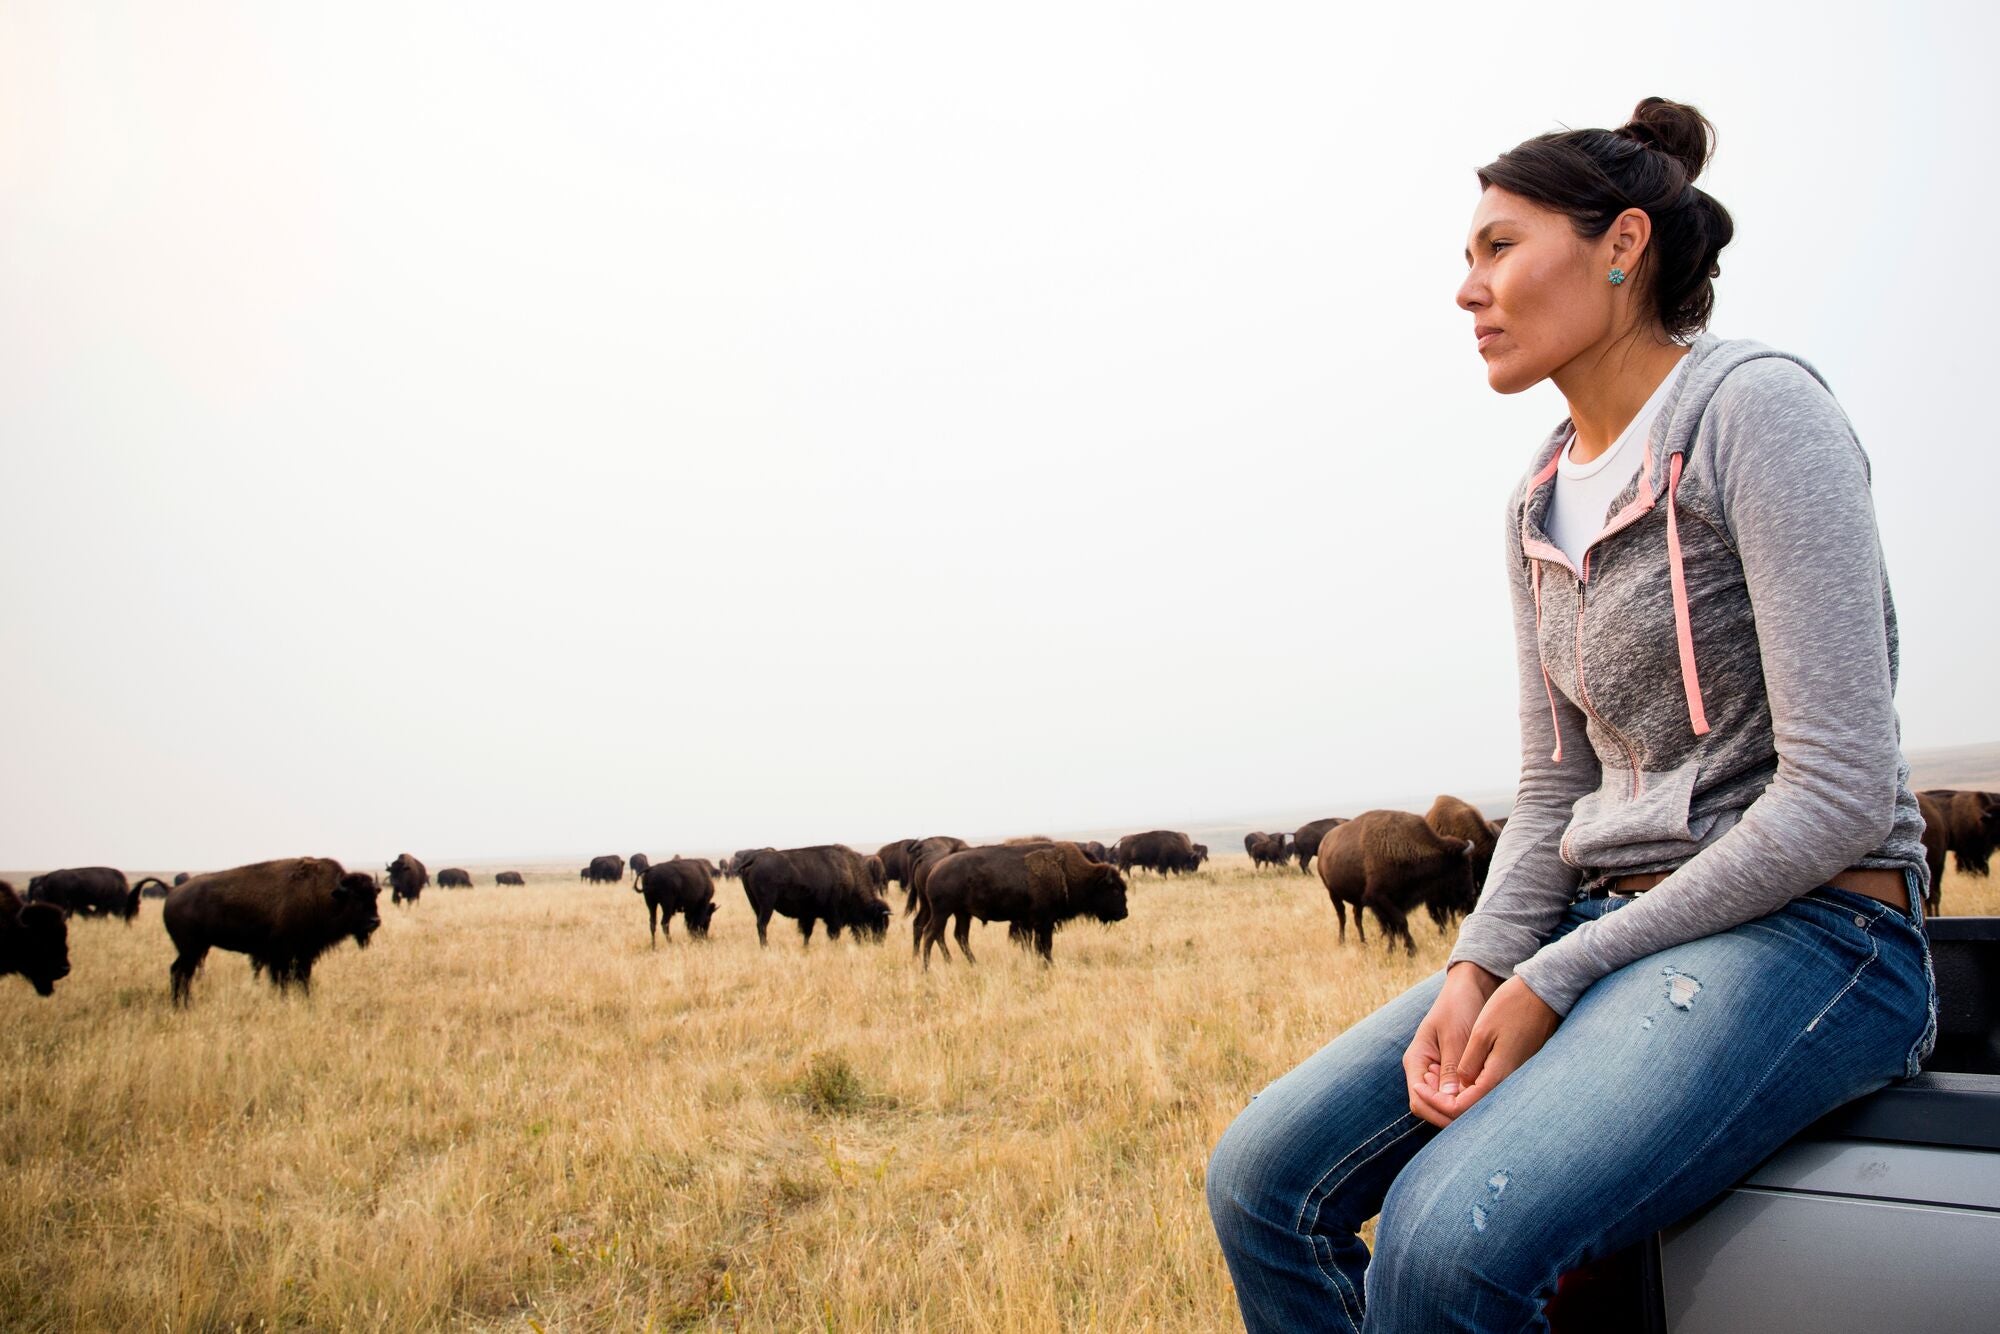 Edmo, who was previously the Bison Project Coordinator for the Tribe, watches over bison at the Blackfeet Nation's Bison Reserve in Browning, Montana.